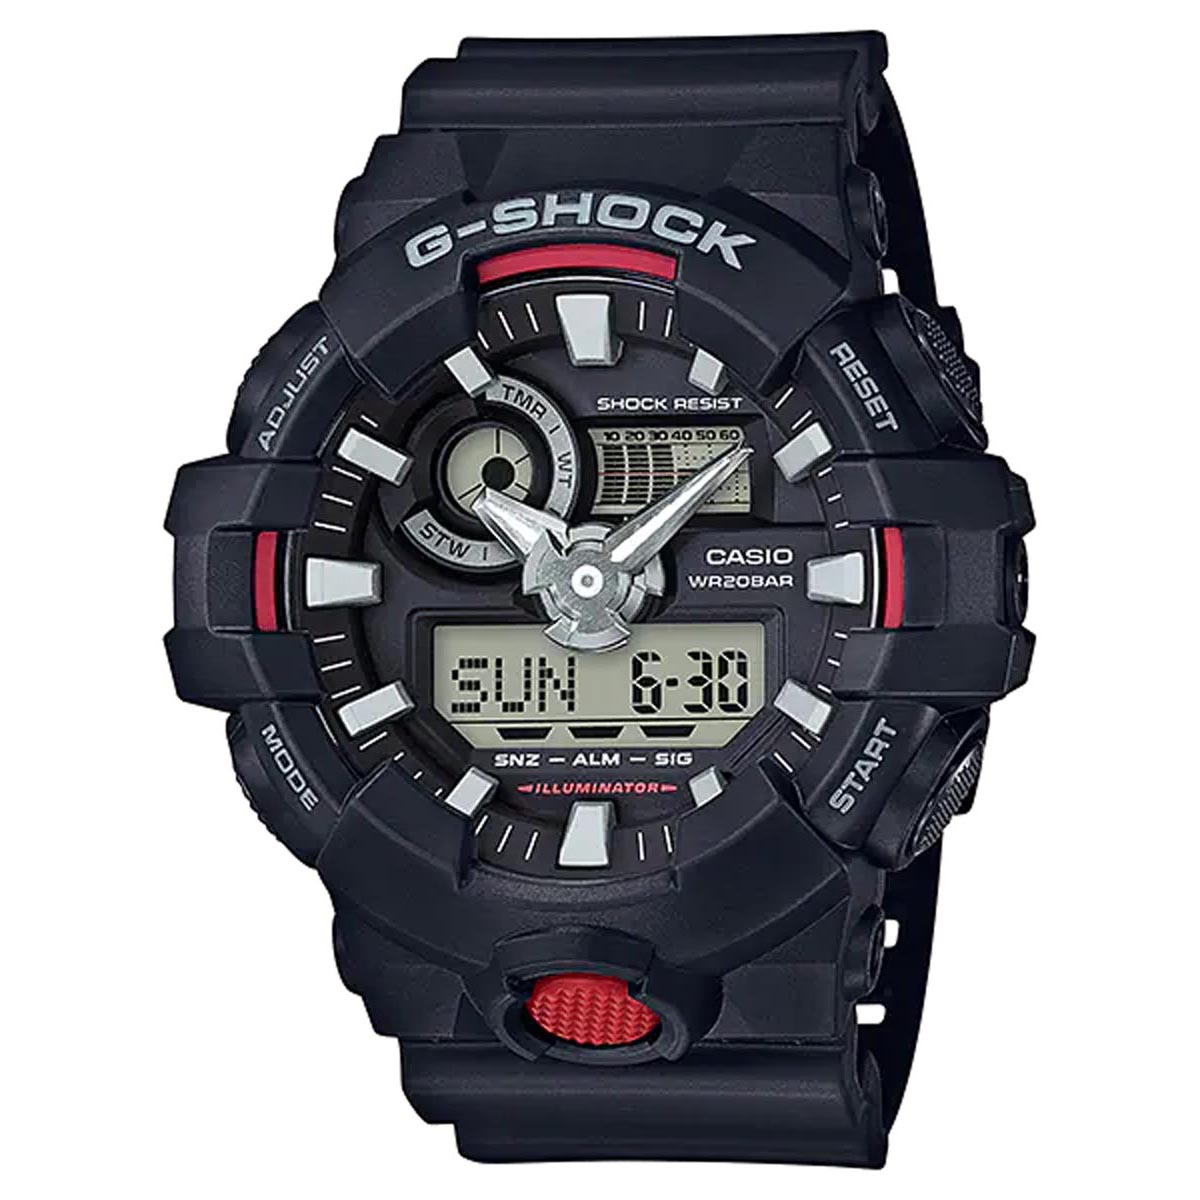 G Shock Mens Watch with Gray Dial and Black Resin Strap (quartz movement)